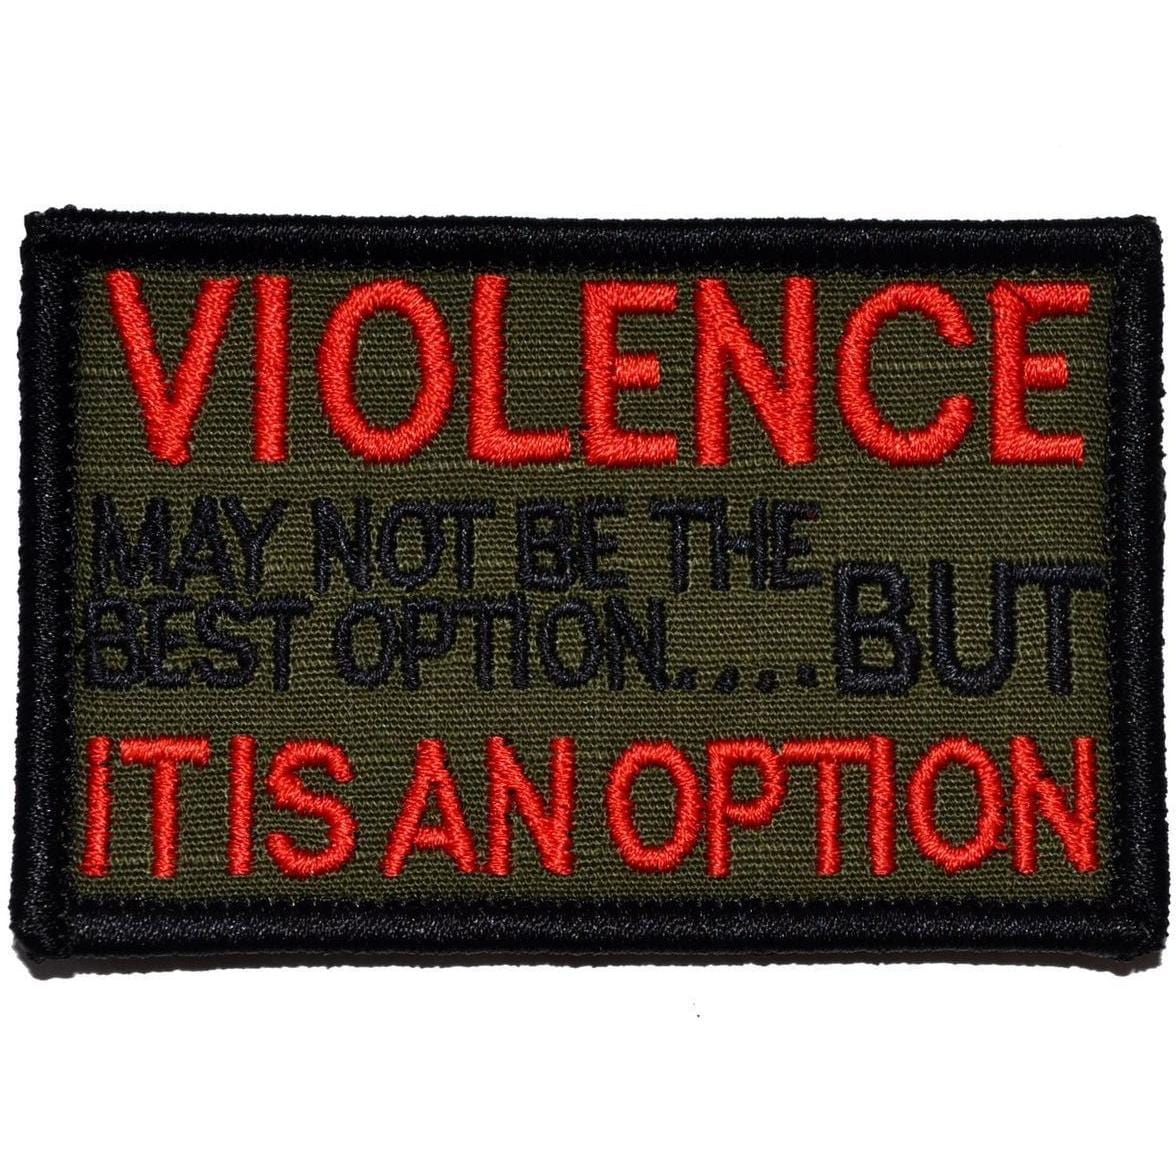 I Choose Violence Funny Morale Patch Military Tactical patch Made